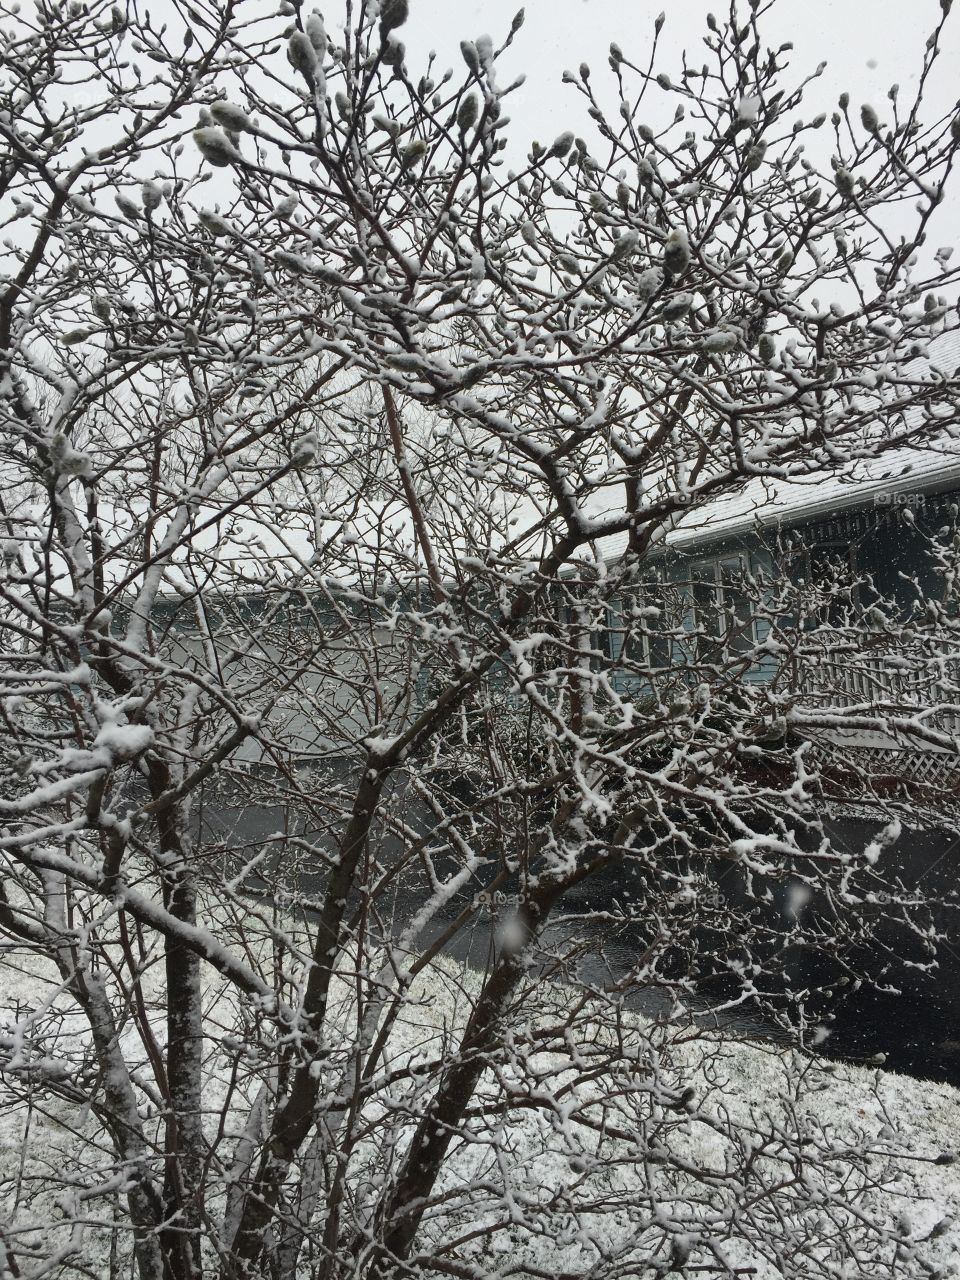 4th day of spring in Illinois. Snow and flower buds. 